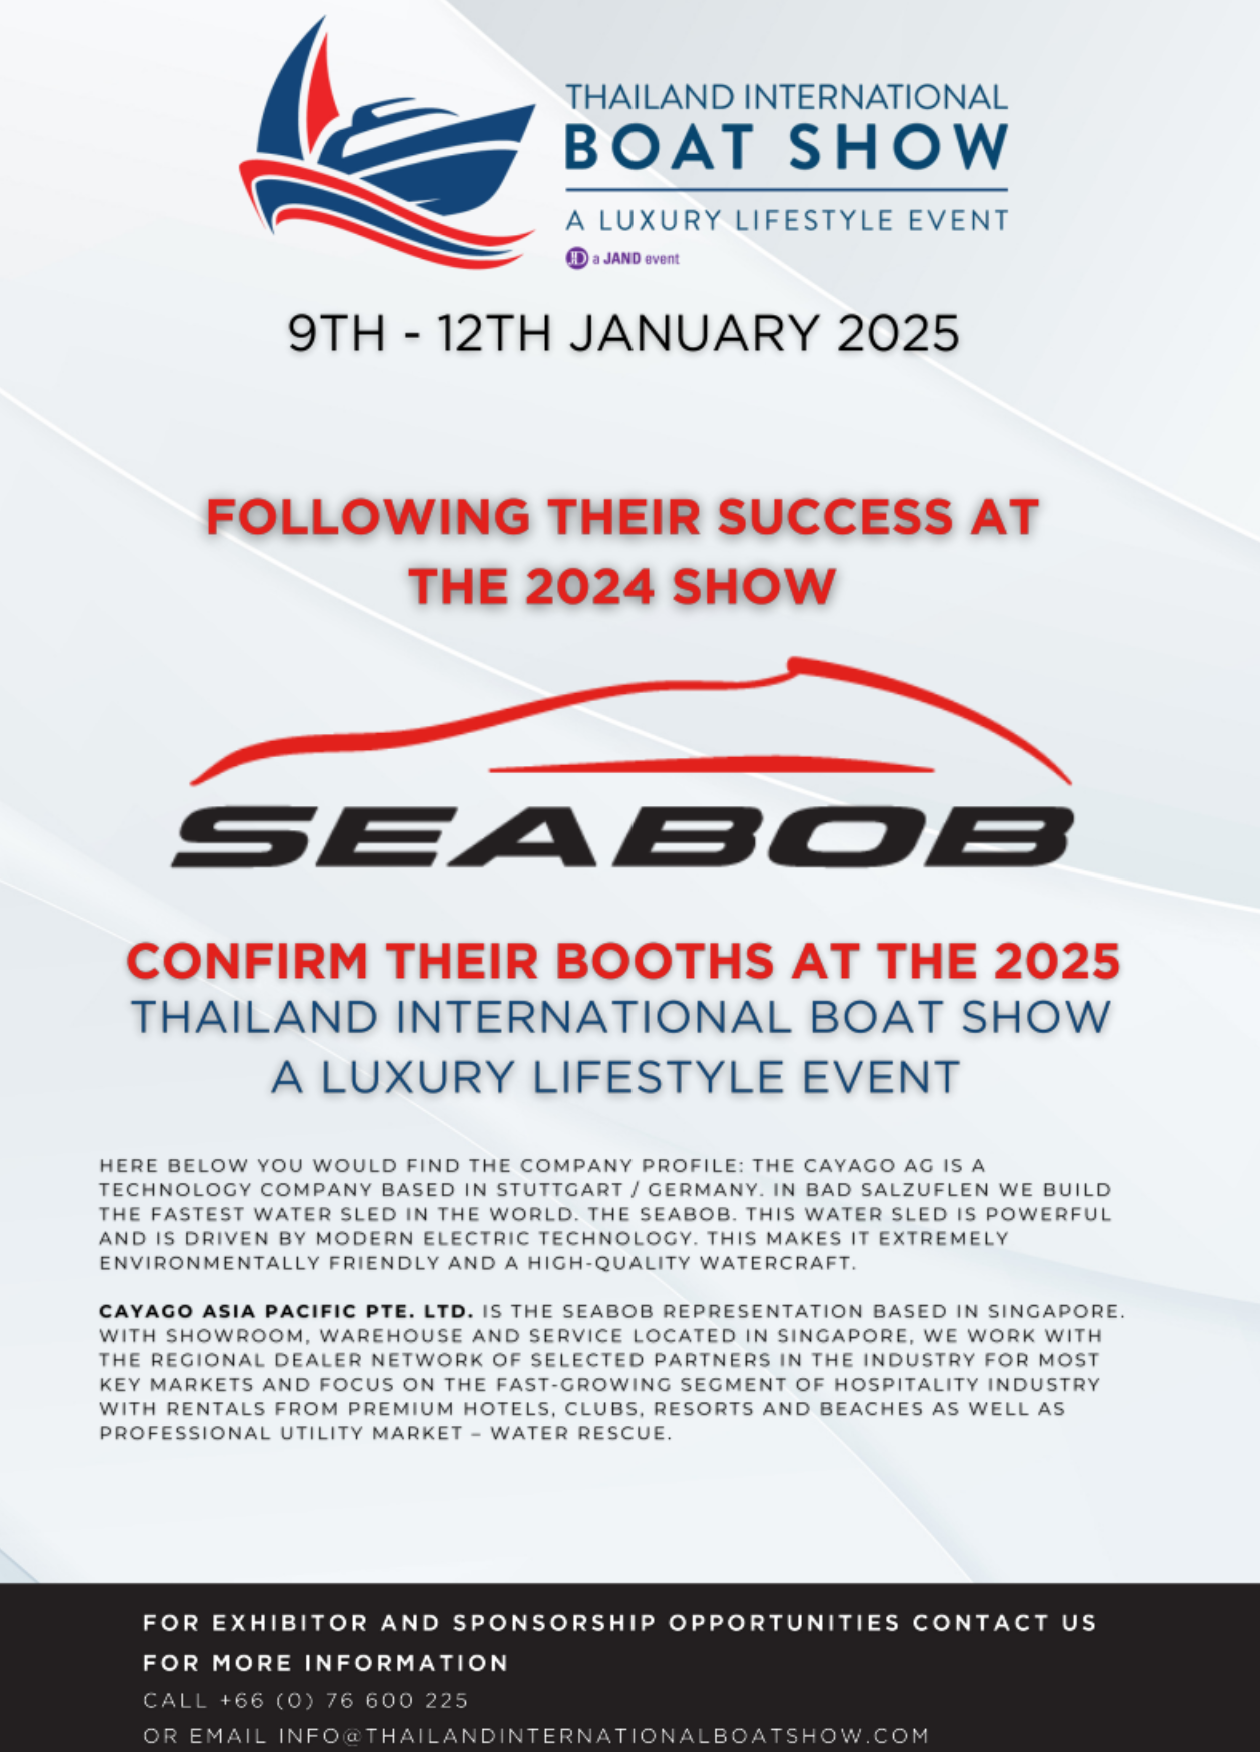 SEABOB Confirm their Booths at the 2025 Thailand International Boat Show A Luxury Lifestyle Event